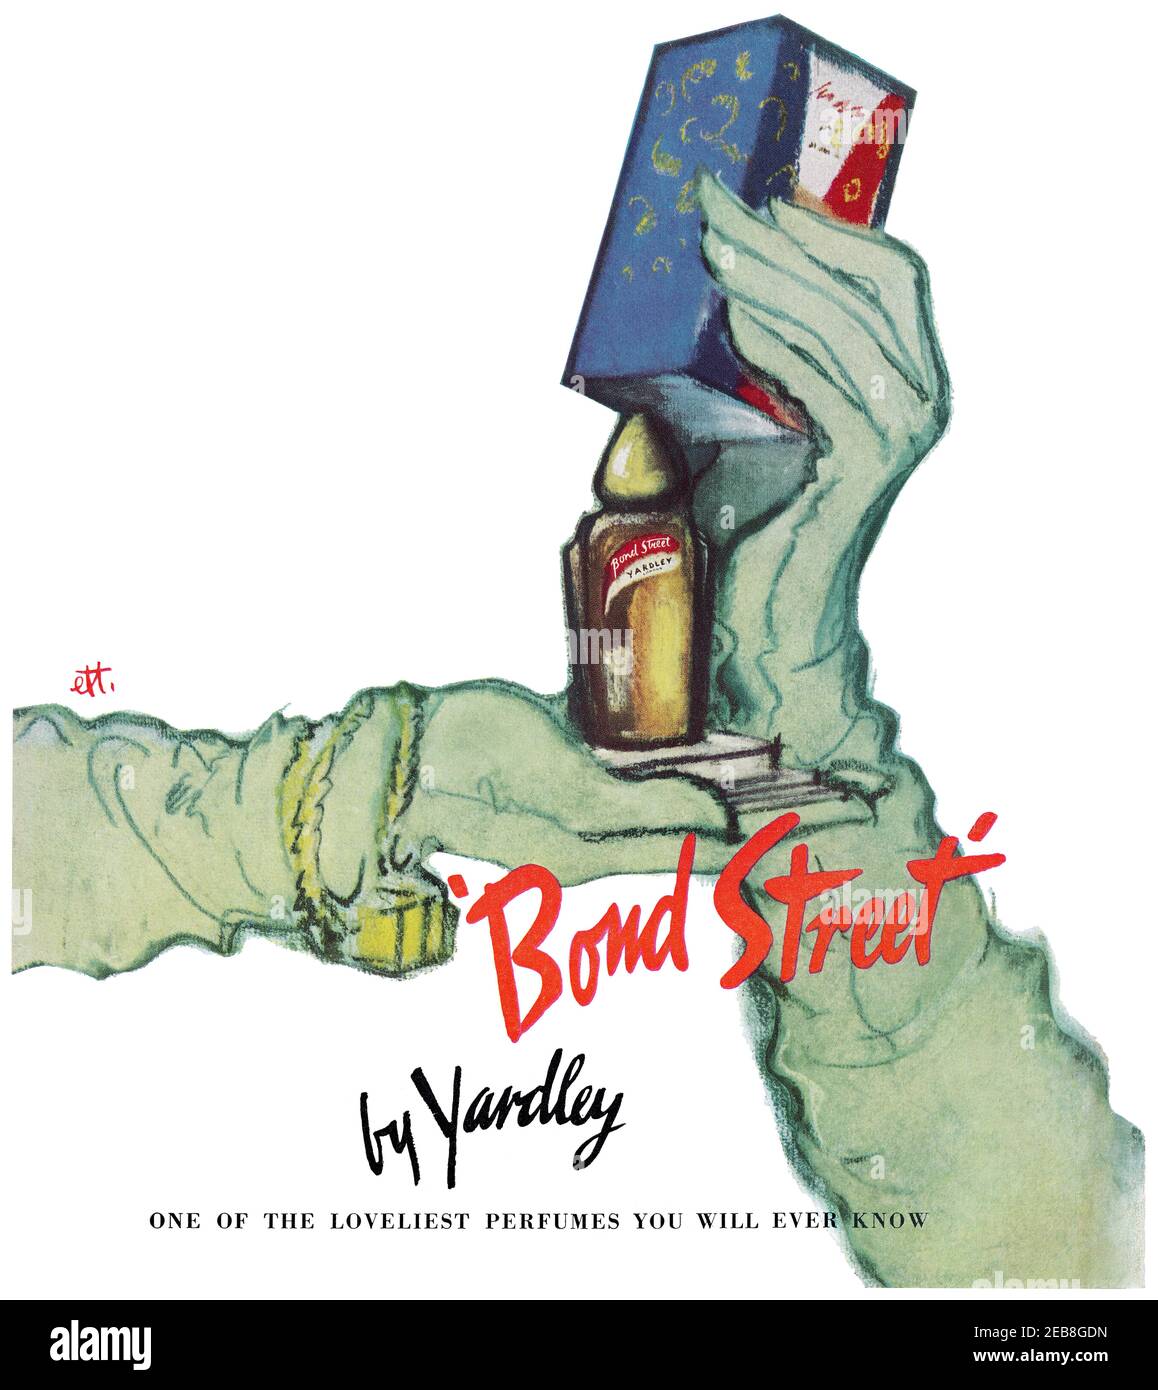 1959 British advertisement for for Bond Street perfume by Yardley. Stock Photo